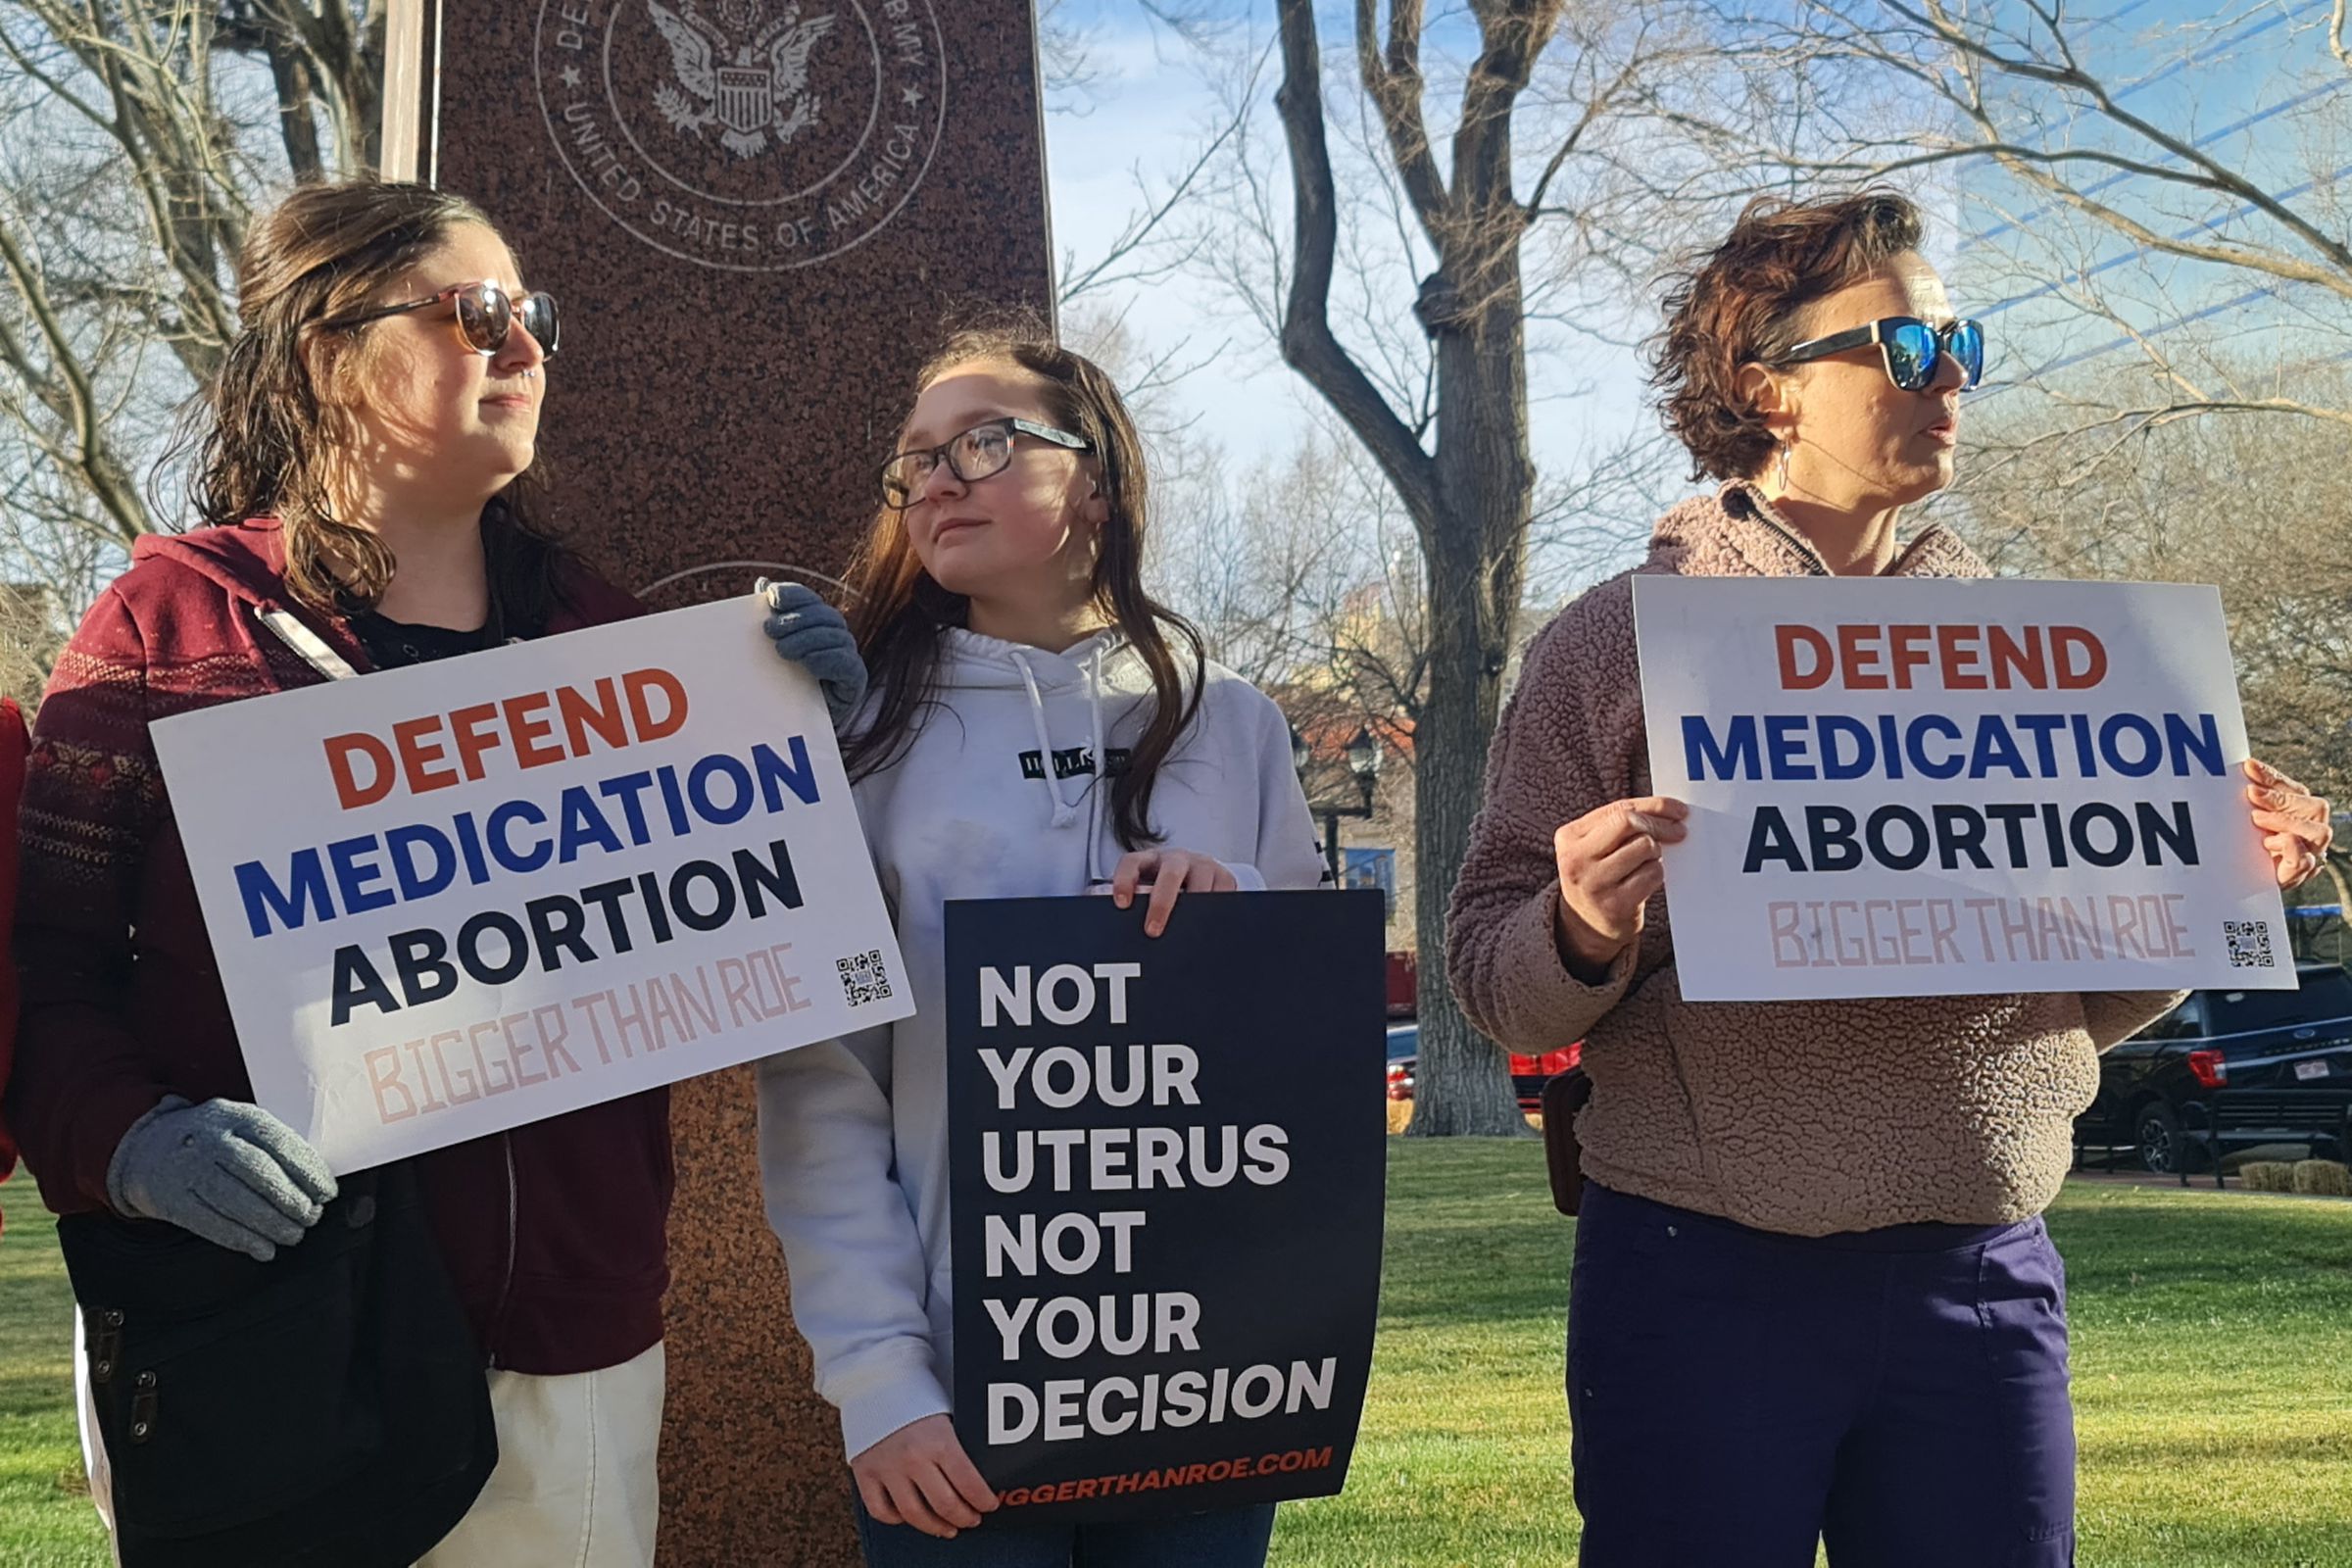 Protestors holding signs that read “defend medication abortion” and “not your uterus not your decision.”